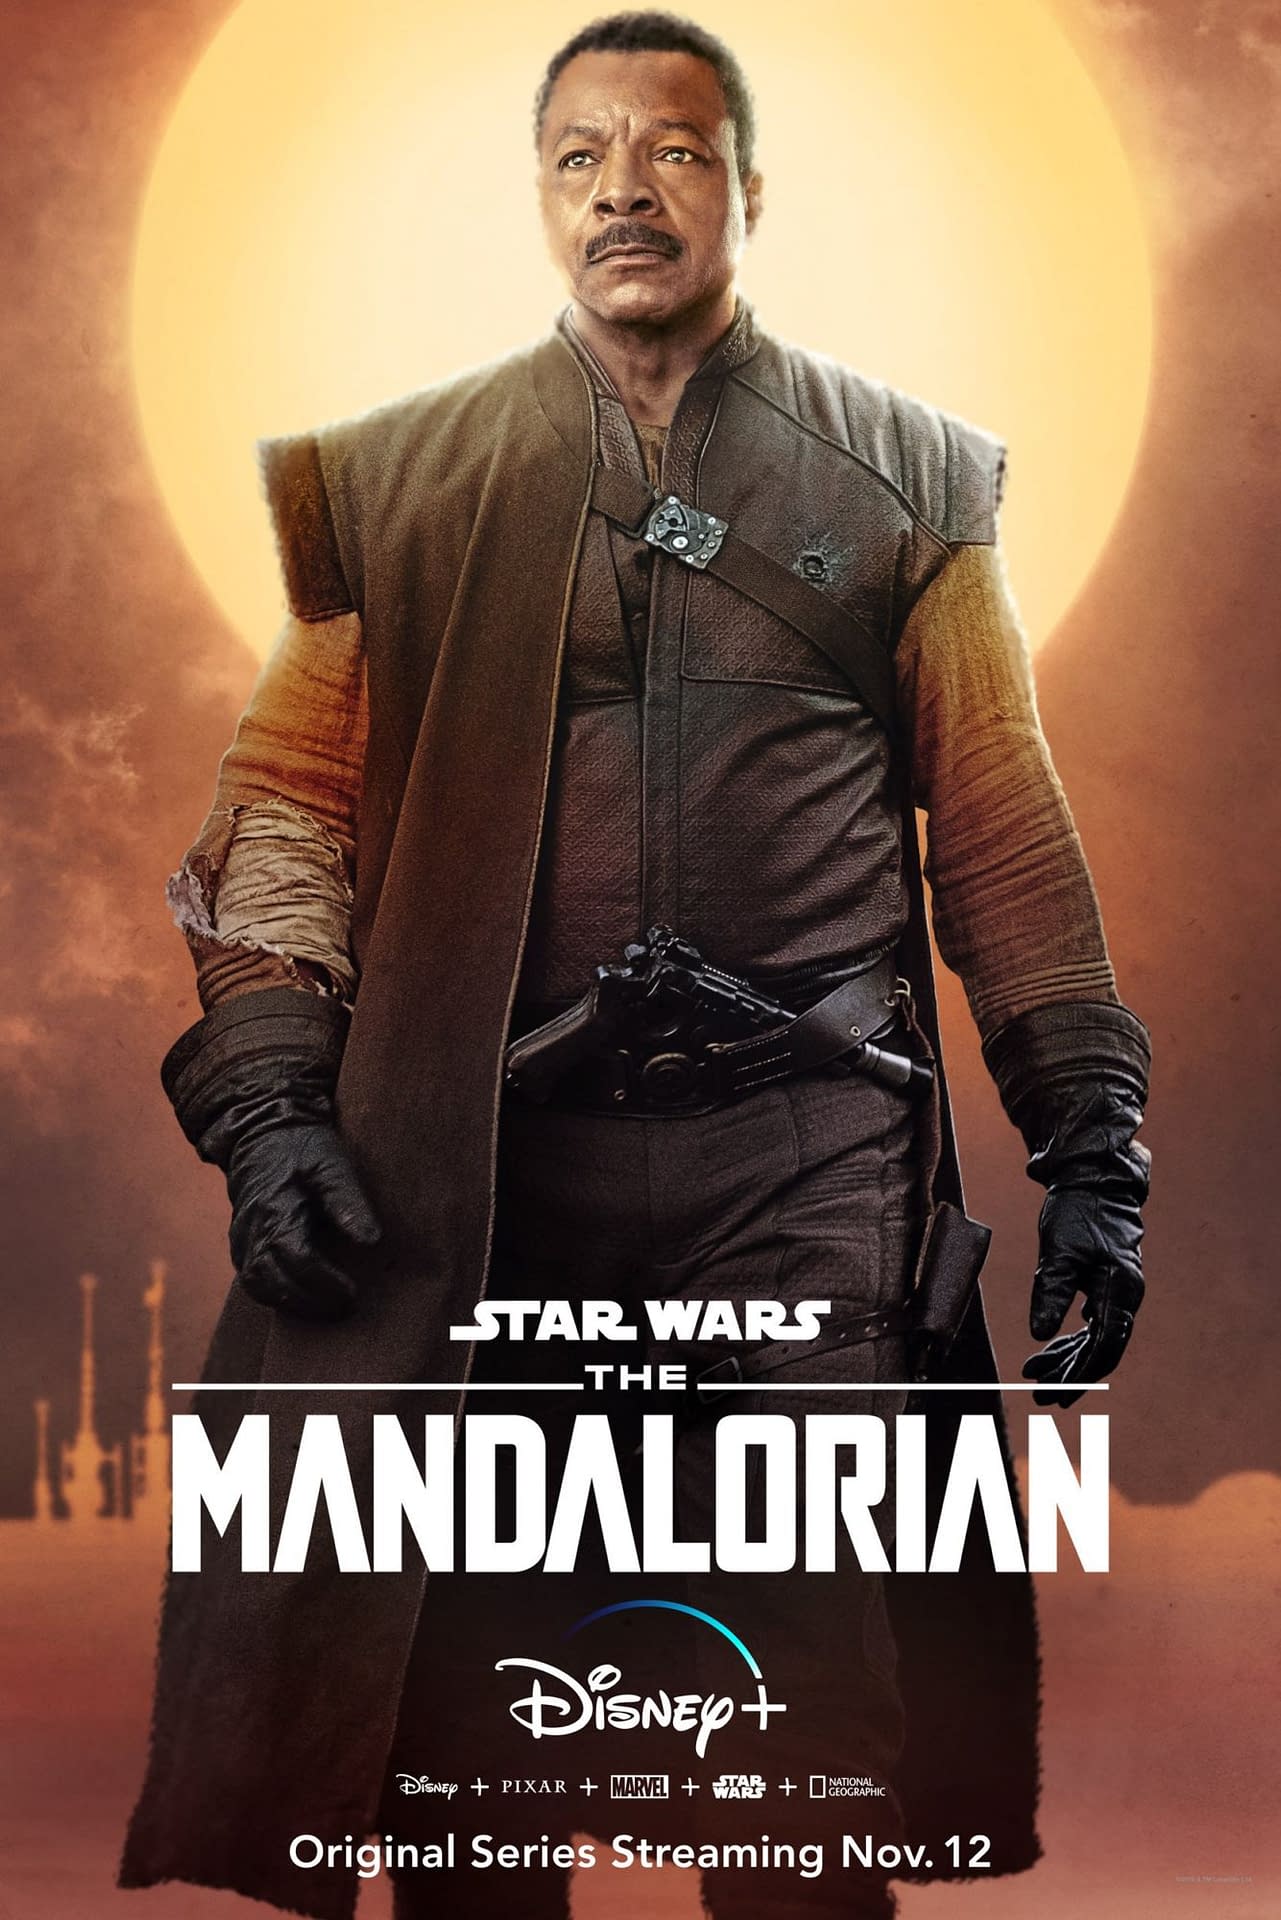 "The Mandalorian": Disney+ Offers New Details on Live-Action "Star Wars" Series [PREVIEW]